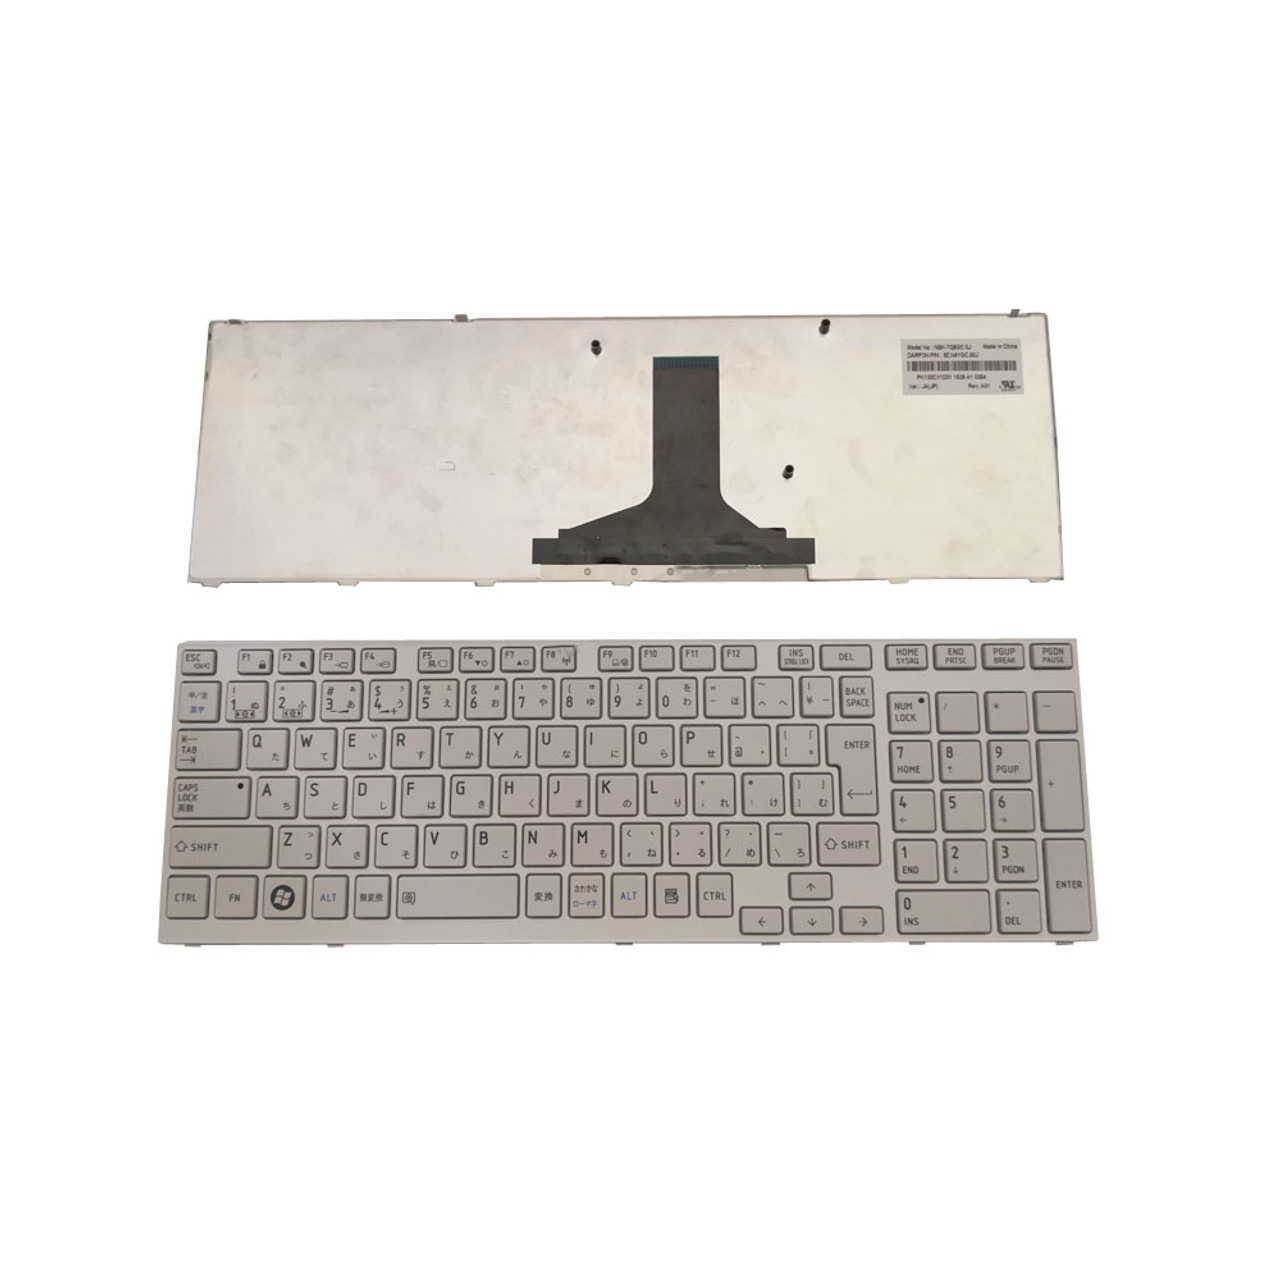 Laptop Keyboard For Toshiba Dynabook T550 T4bb T560 58ab Axw 70mw Axw 90mw Japanese Jp Ja White New Linda Parts